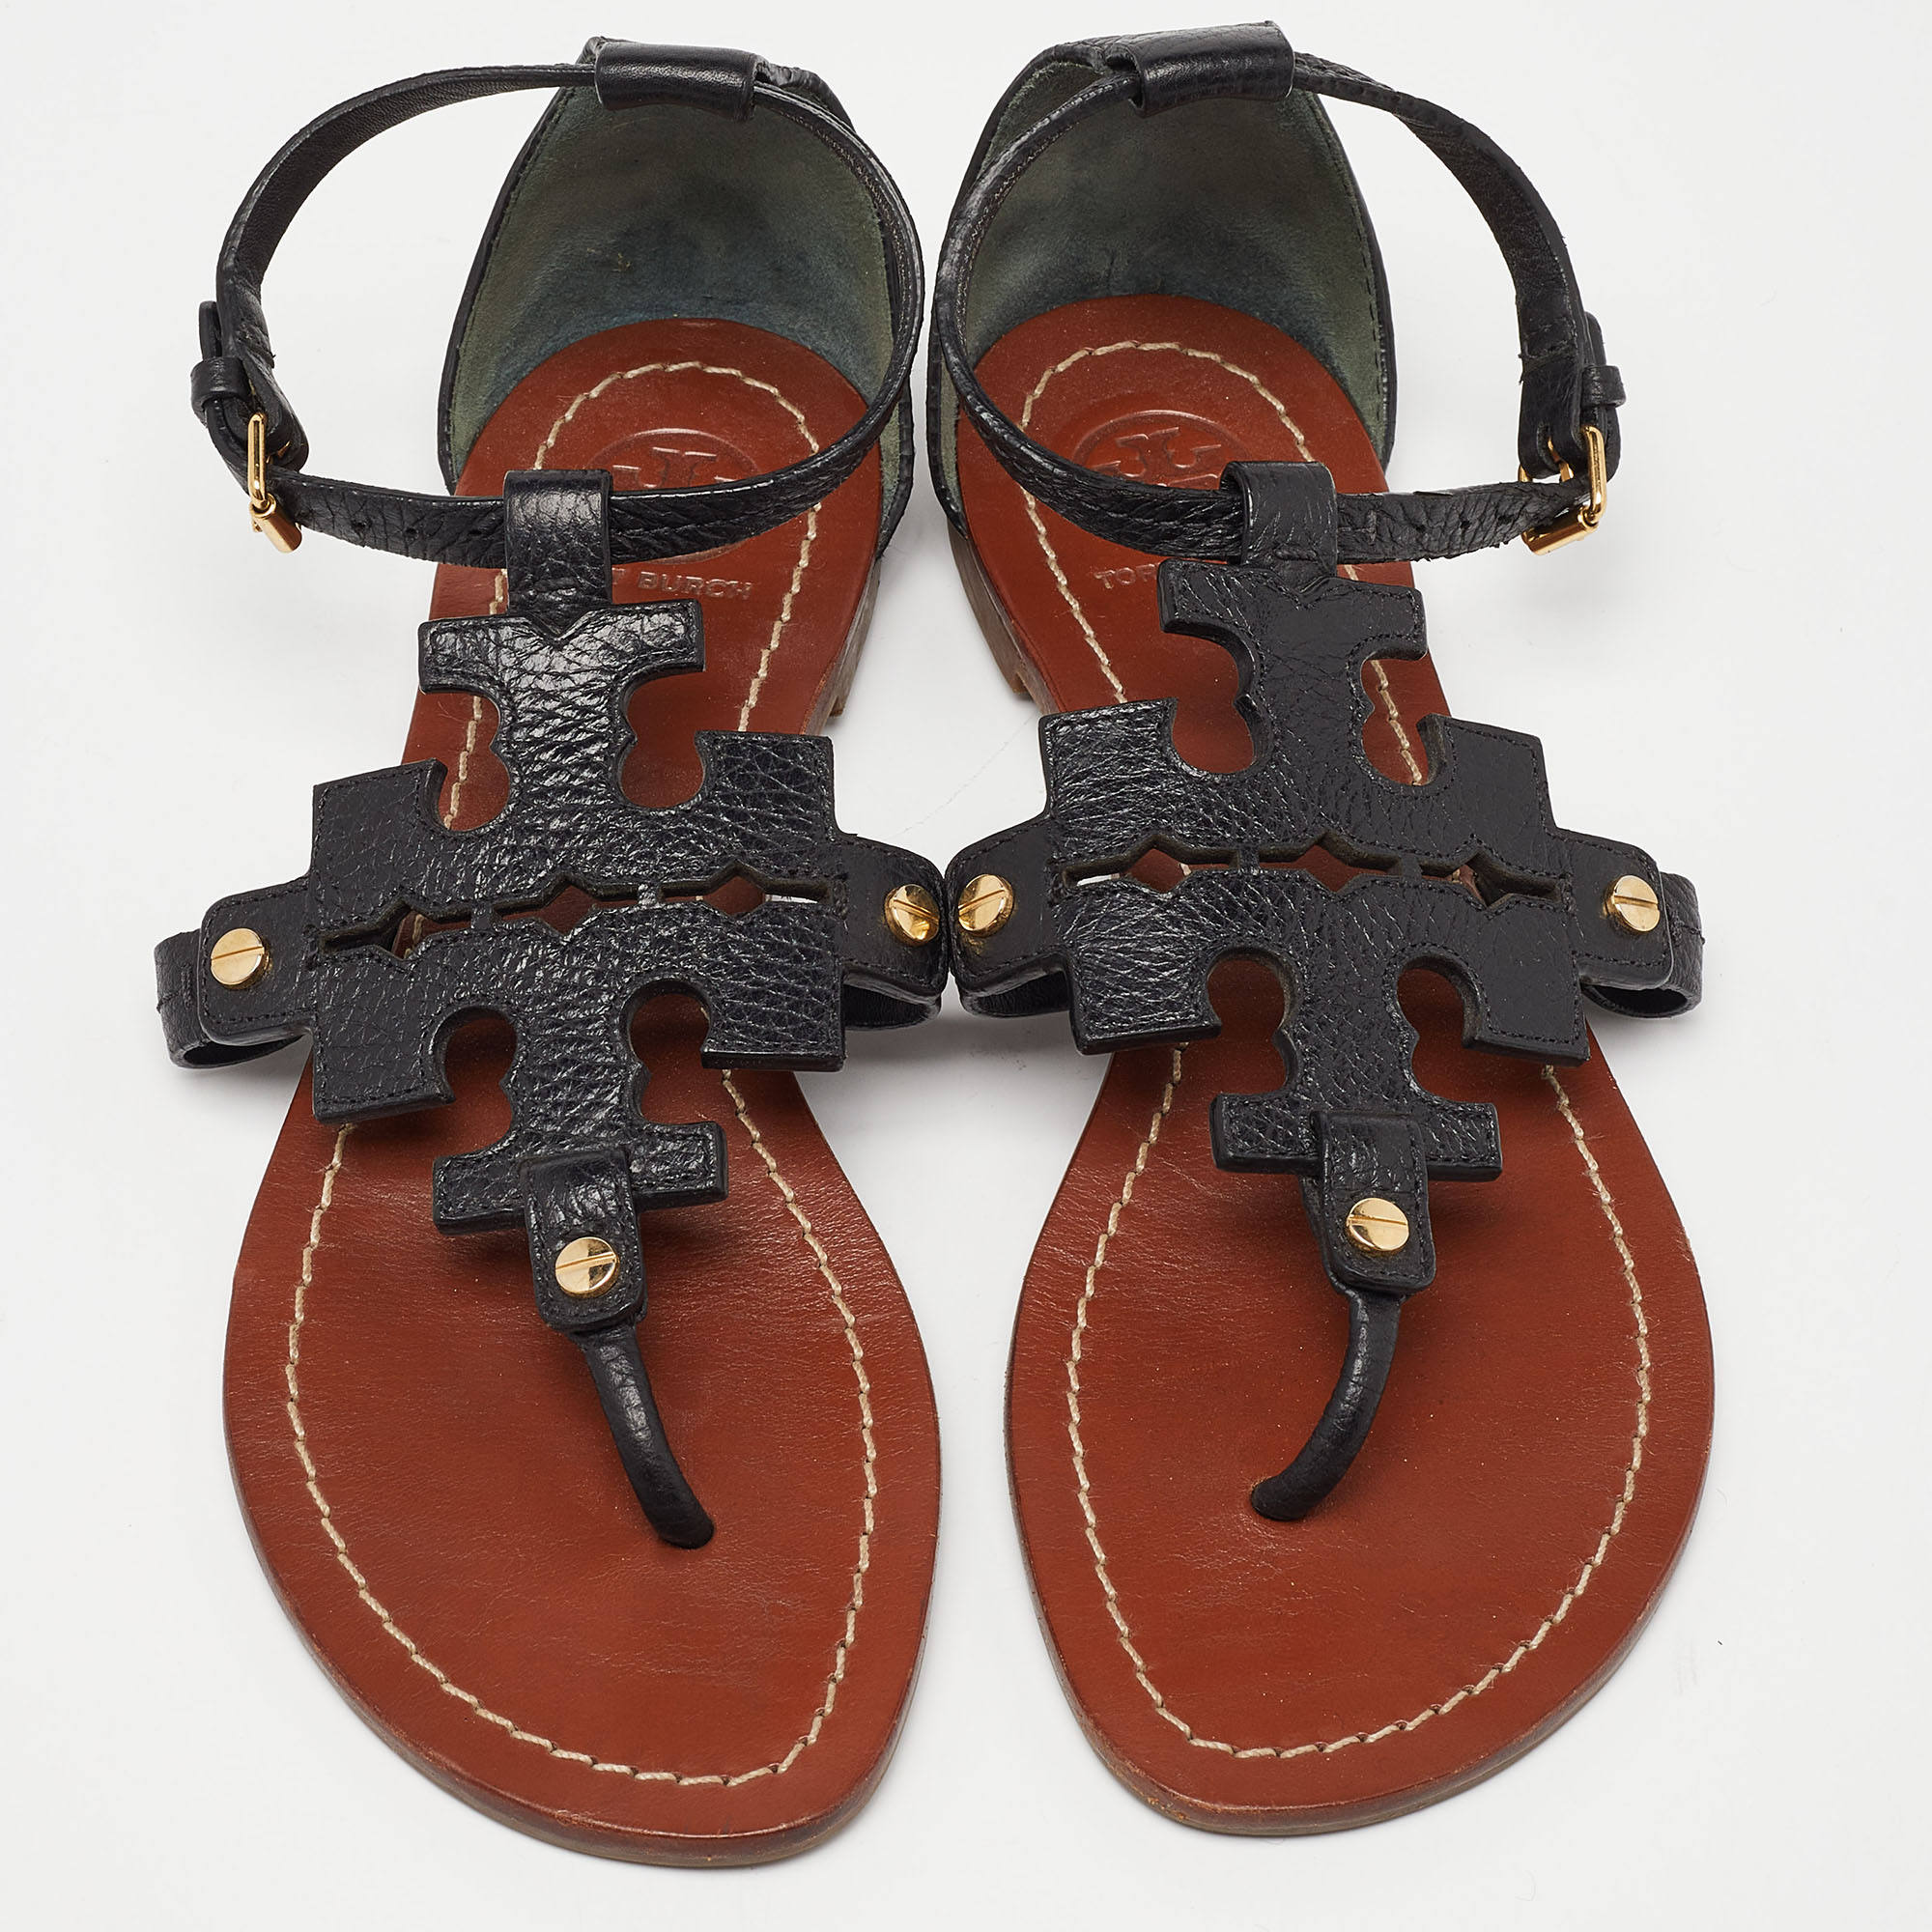 Tory Burch Black Leather Phoebe Flat Sandals Size 37.5